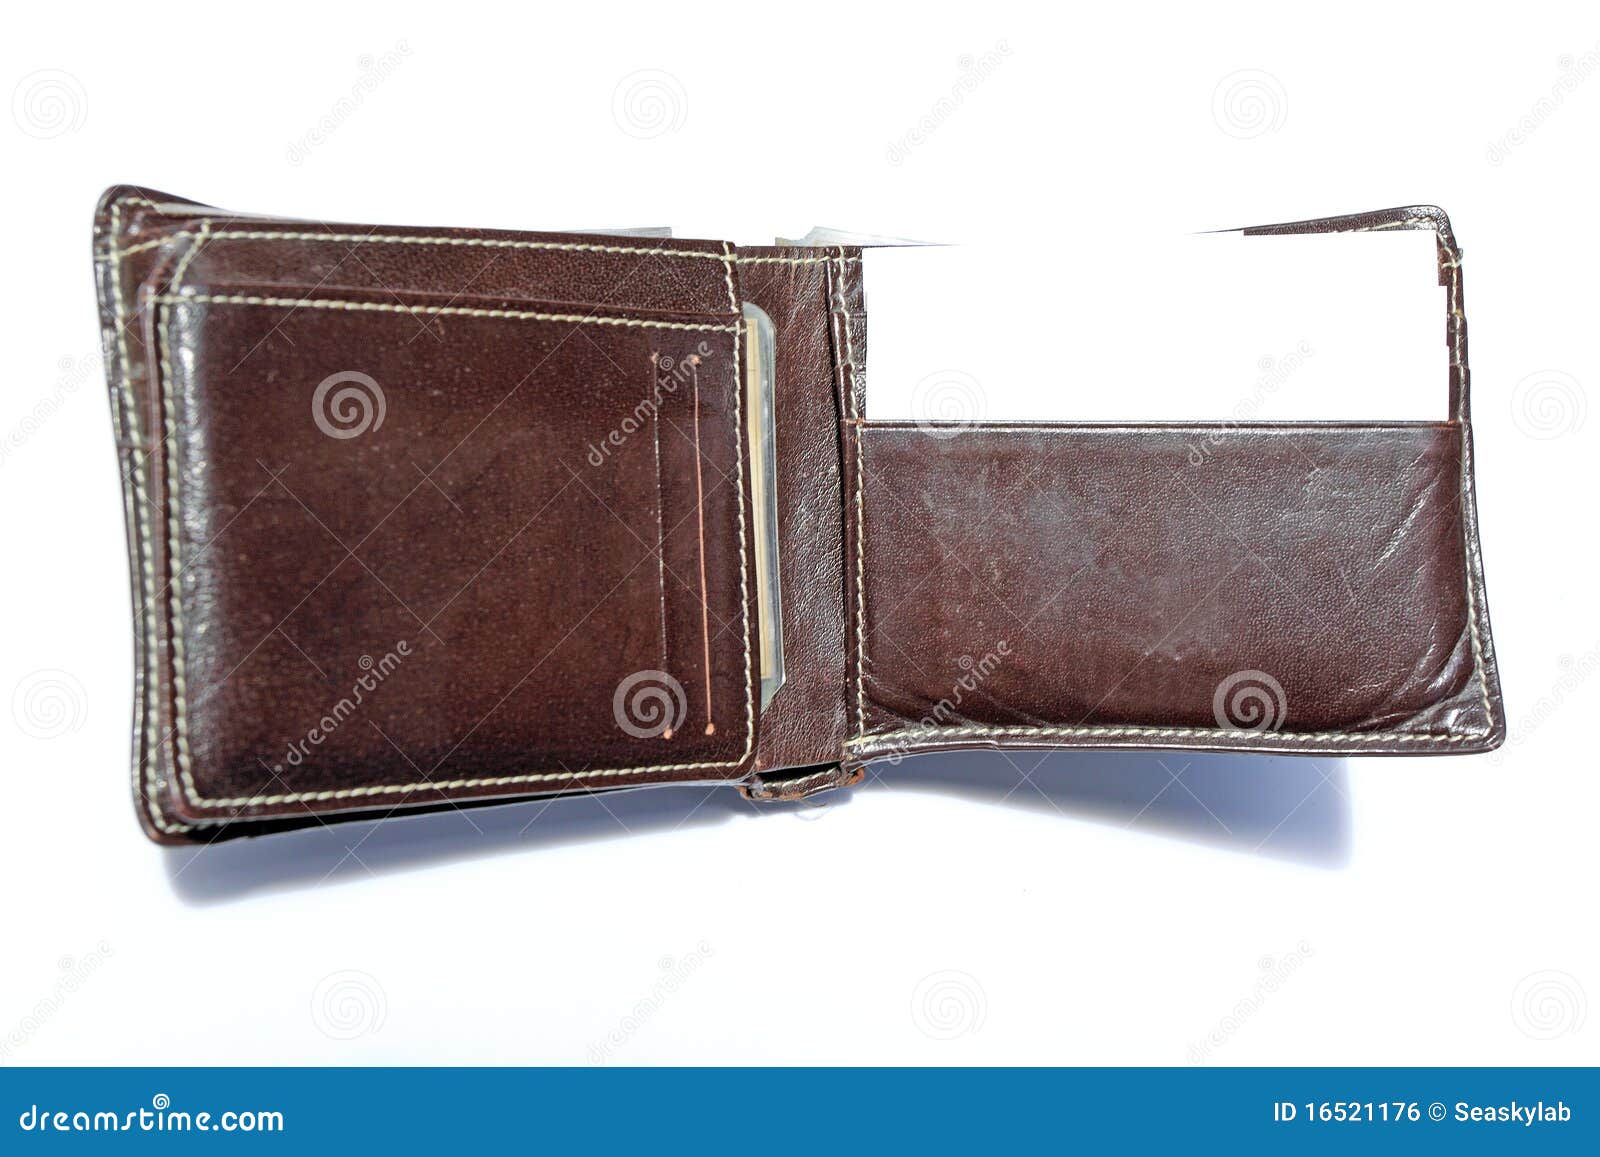 Brown leather wallet stock photo. Image of paying, fees - 16521176